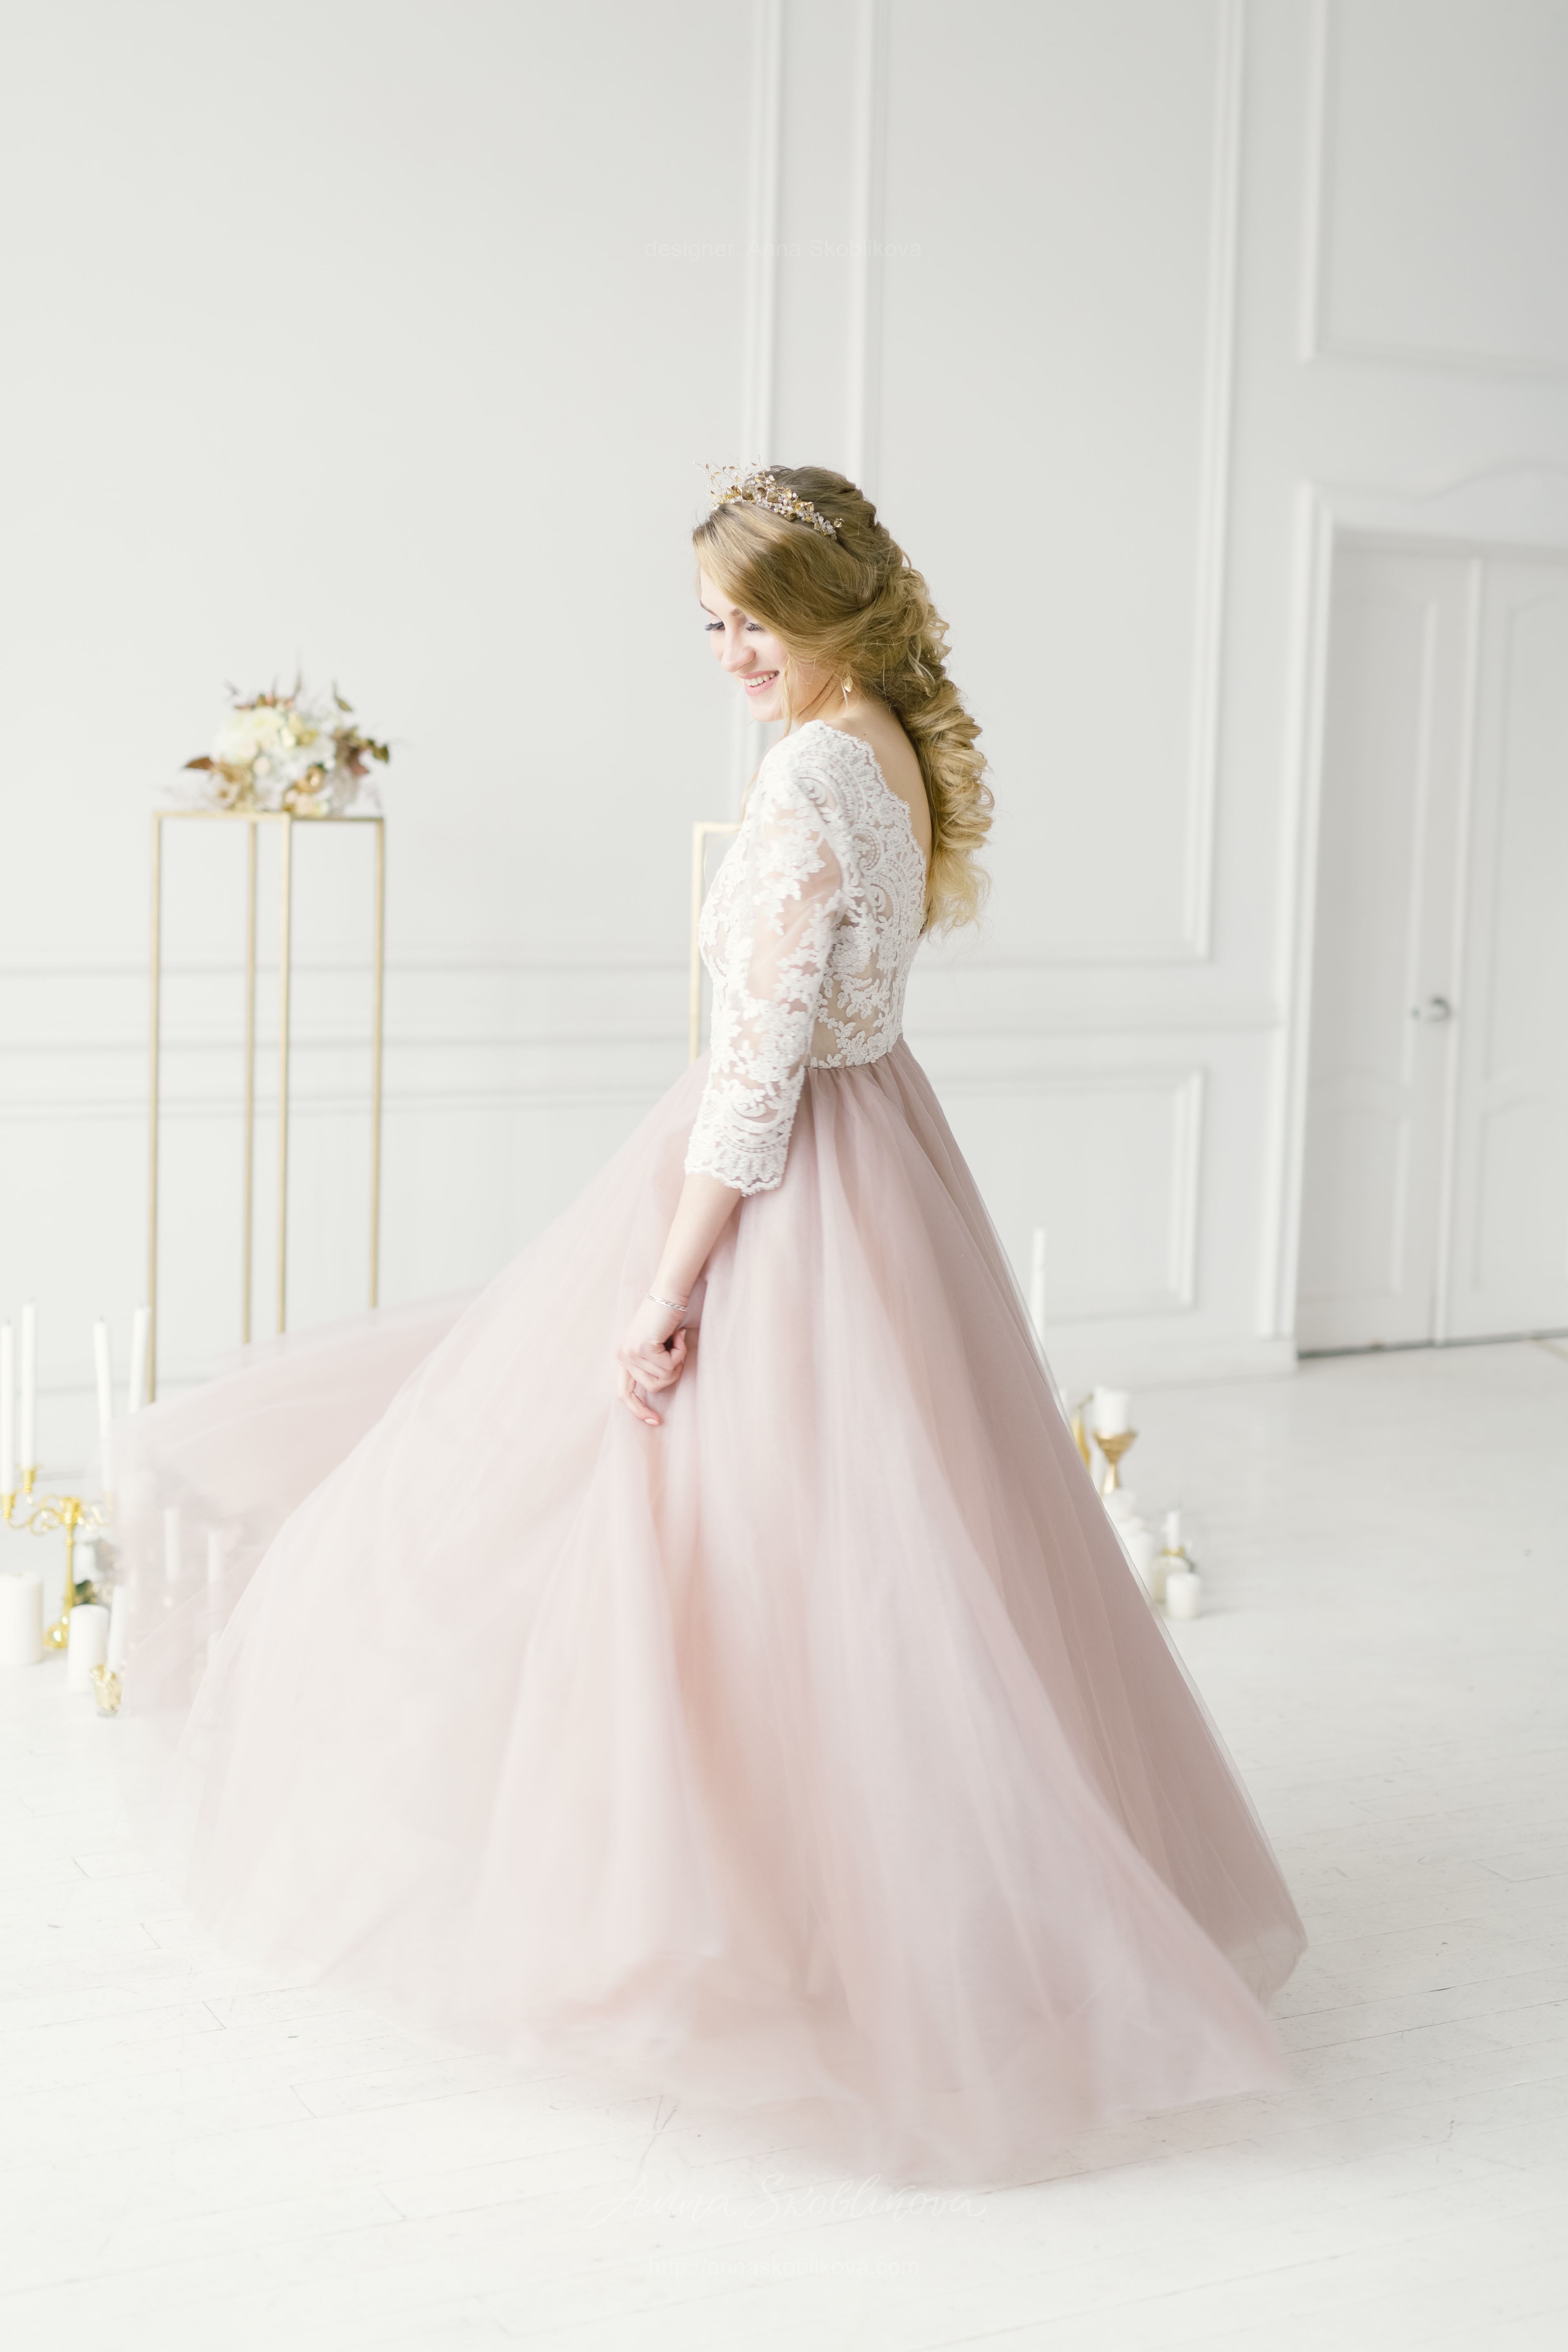 A Dash of Romance! 30 Wedding Dresses With a Touch of Pink! | Pink wedding  dresses, Beautiful wedding dresses, Colored wedding dresses